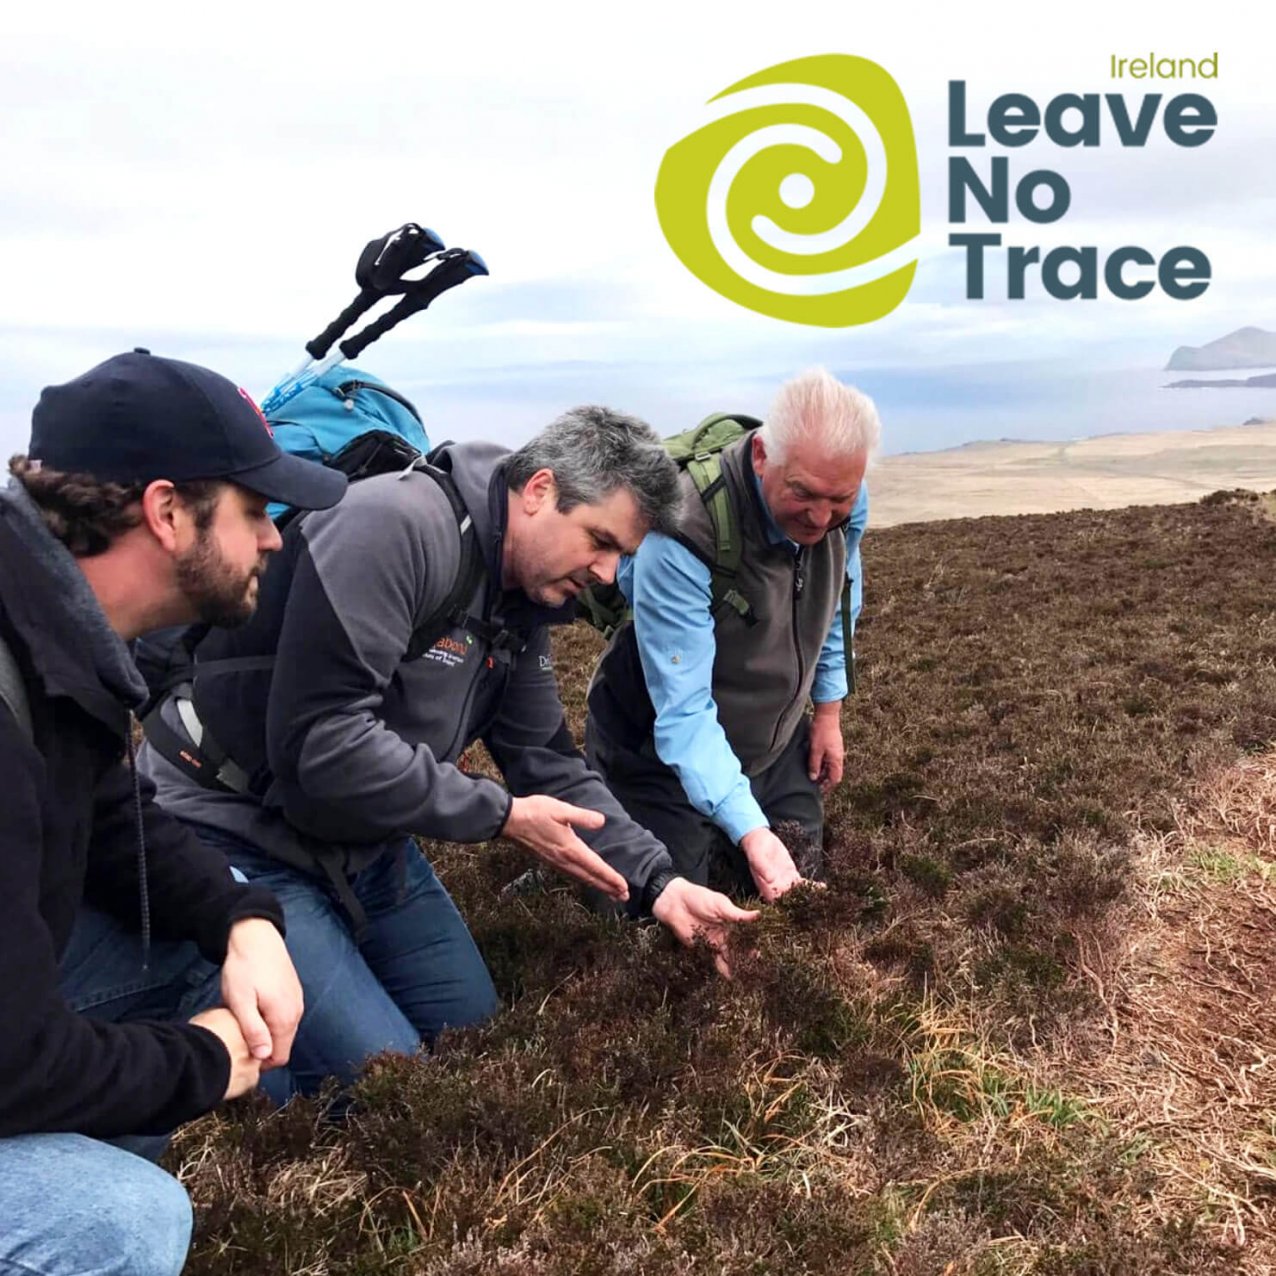 Tour Guide on Leave No Trace training in Ireland